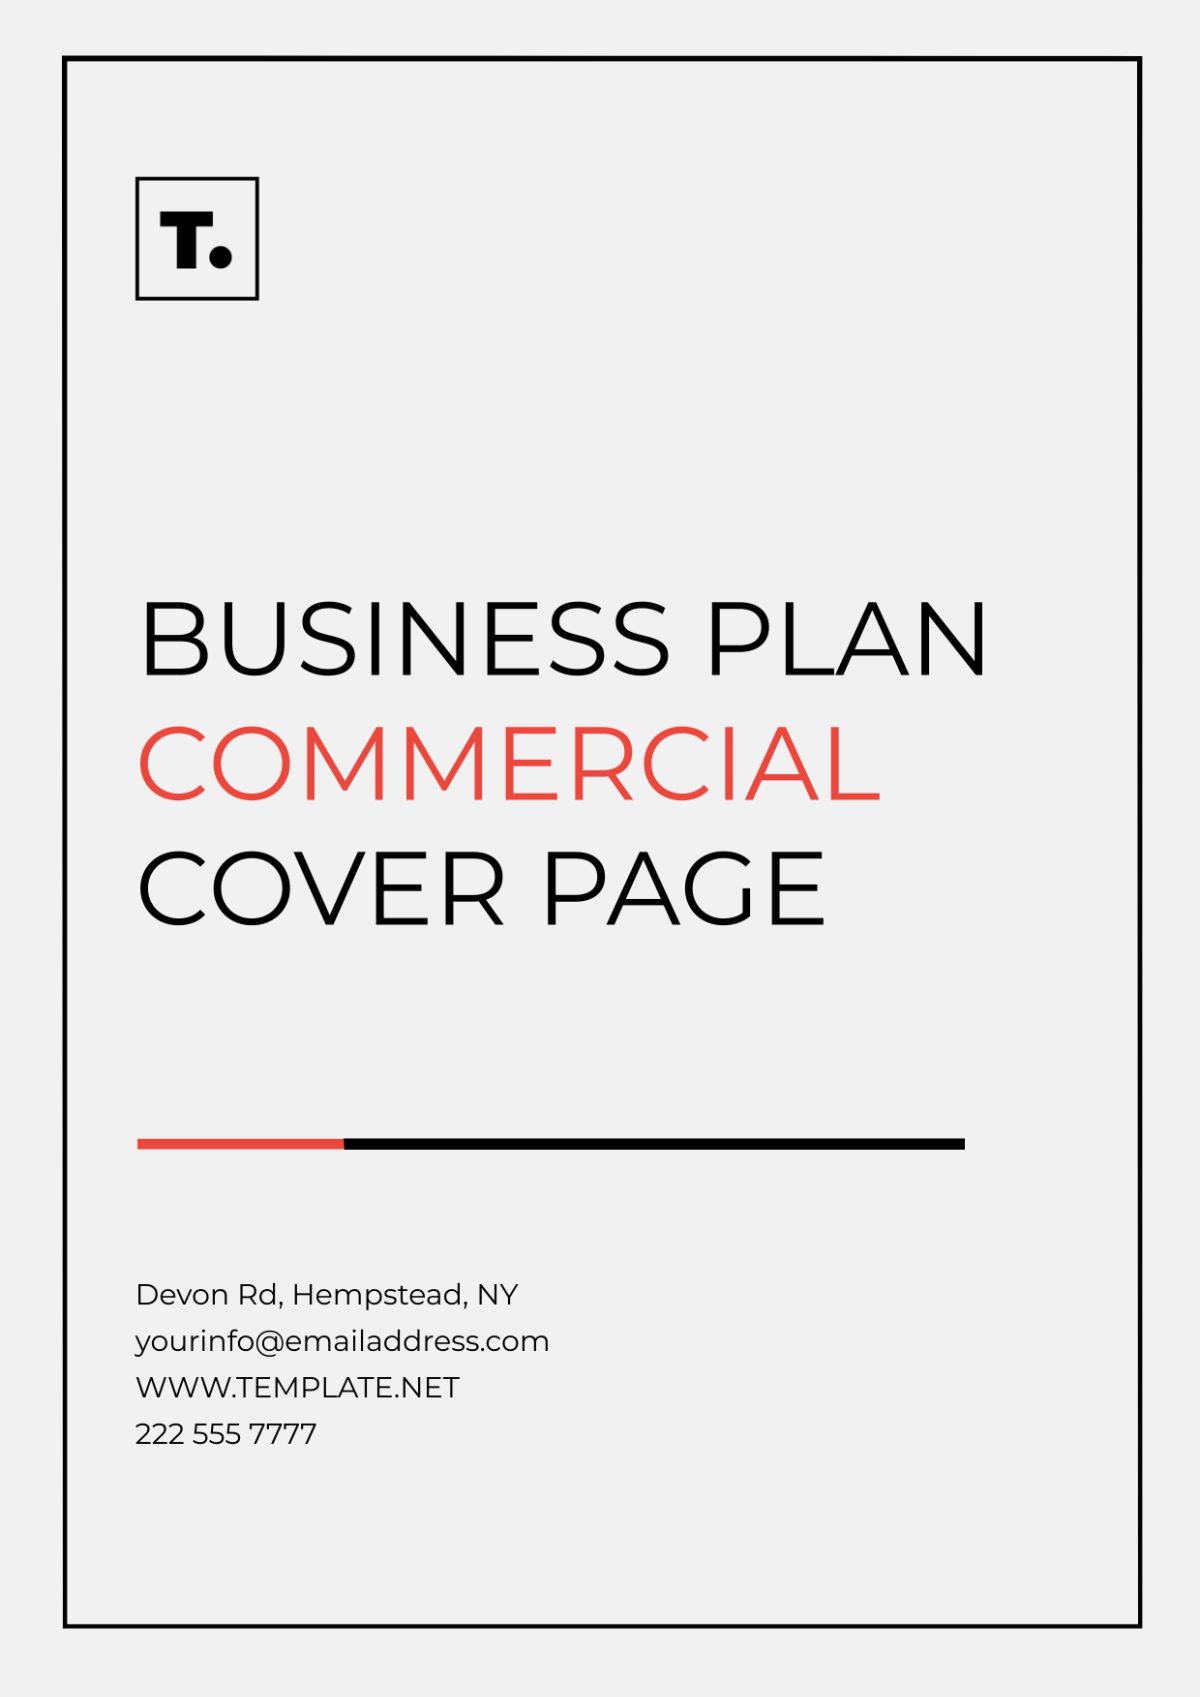 Business Plan Commercial Cover Page